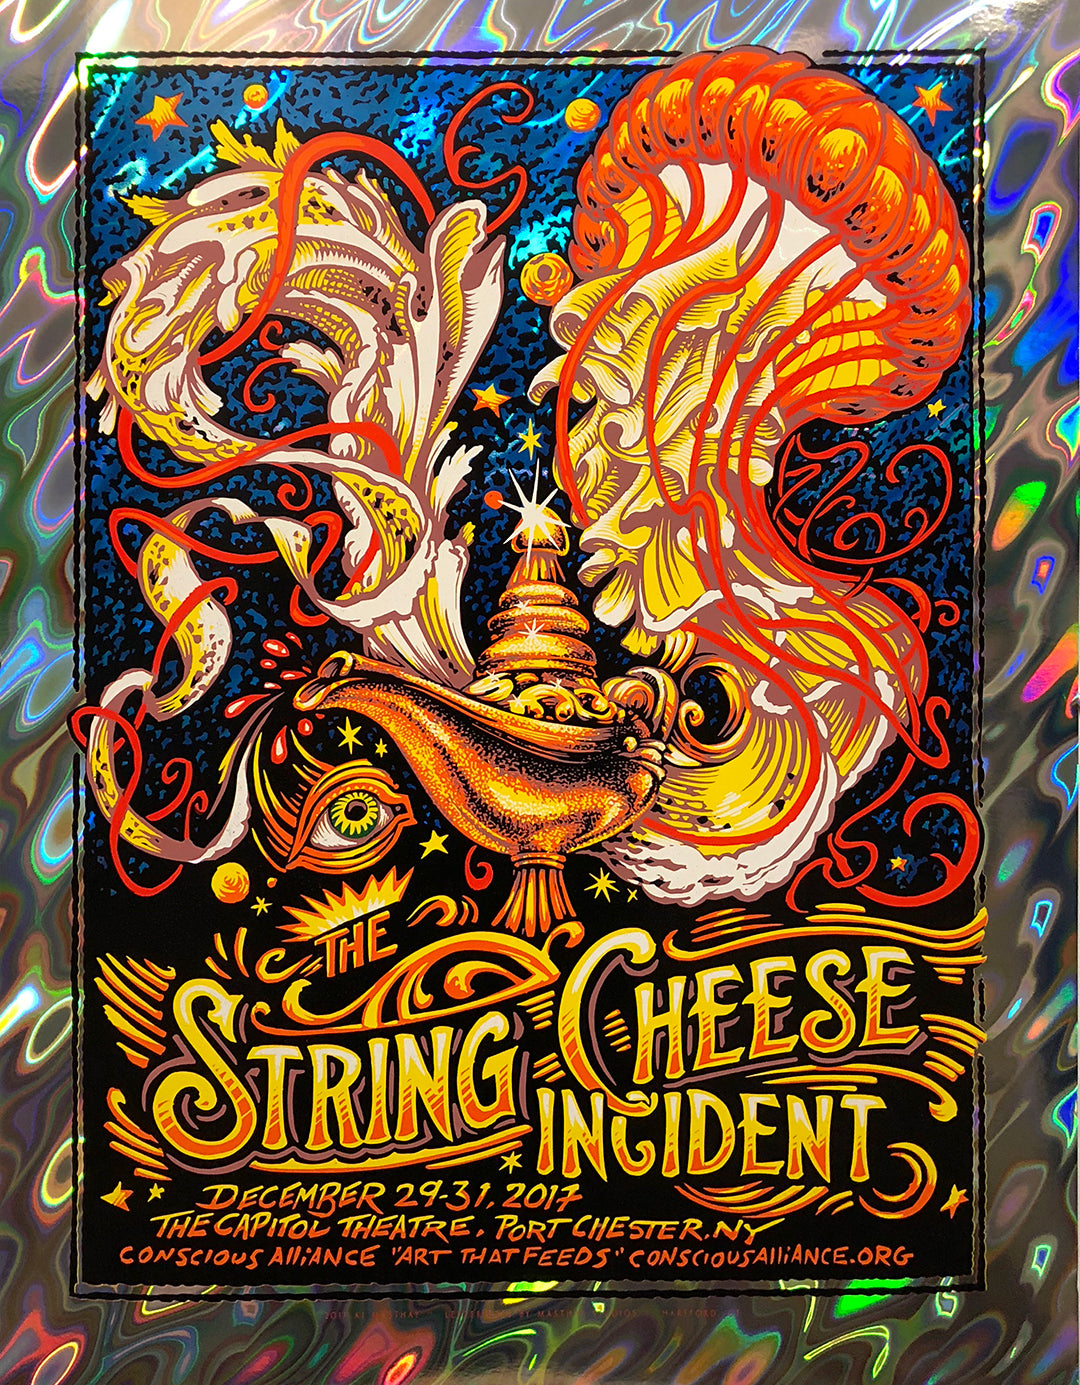 AJ Masthay "The String Cheese Incident - Capitol Theatre" Lava Foil